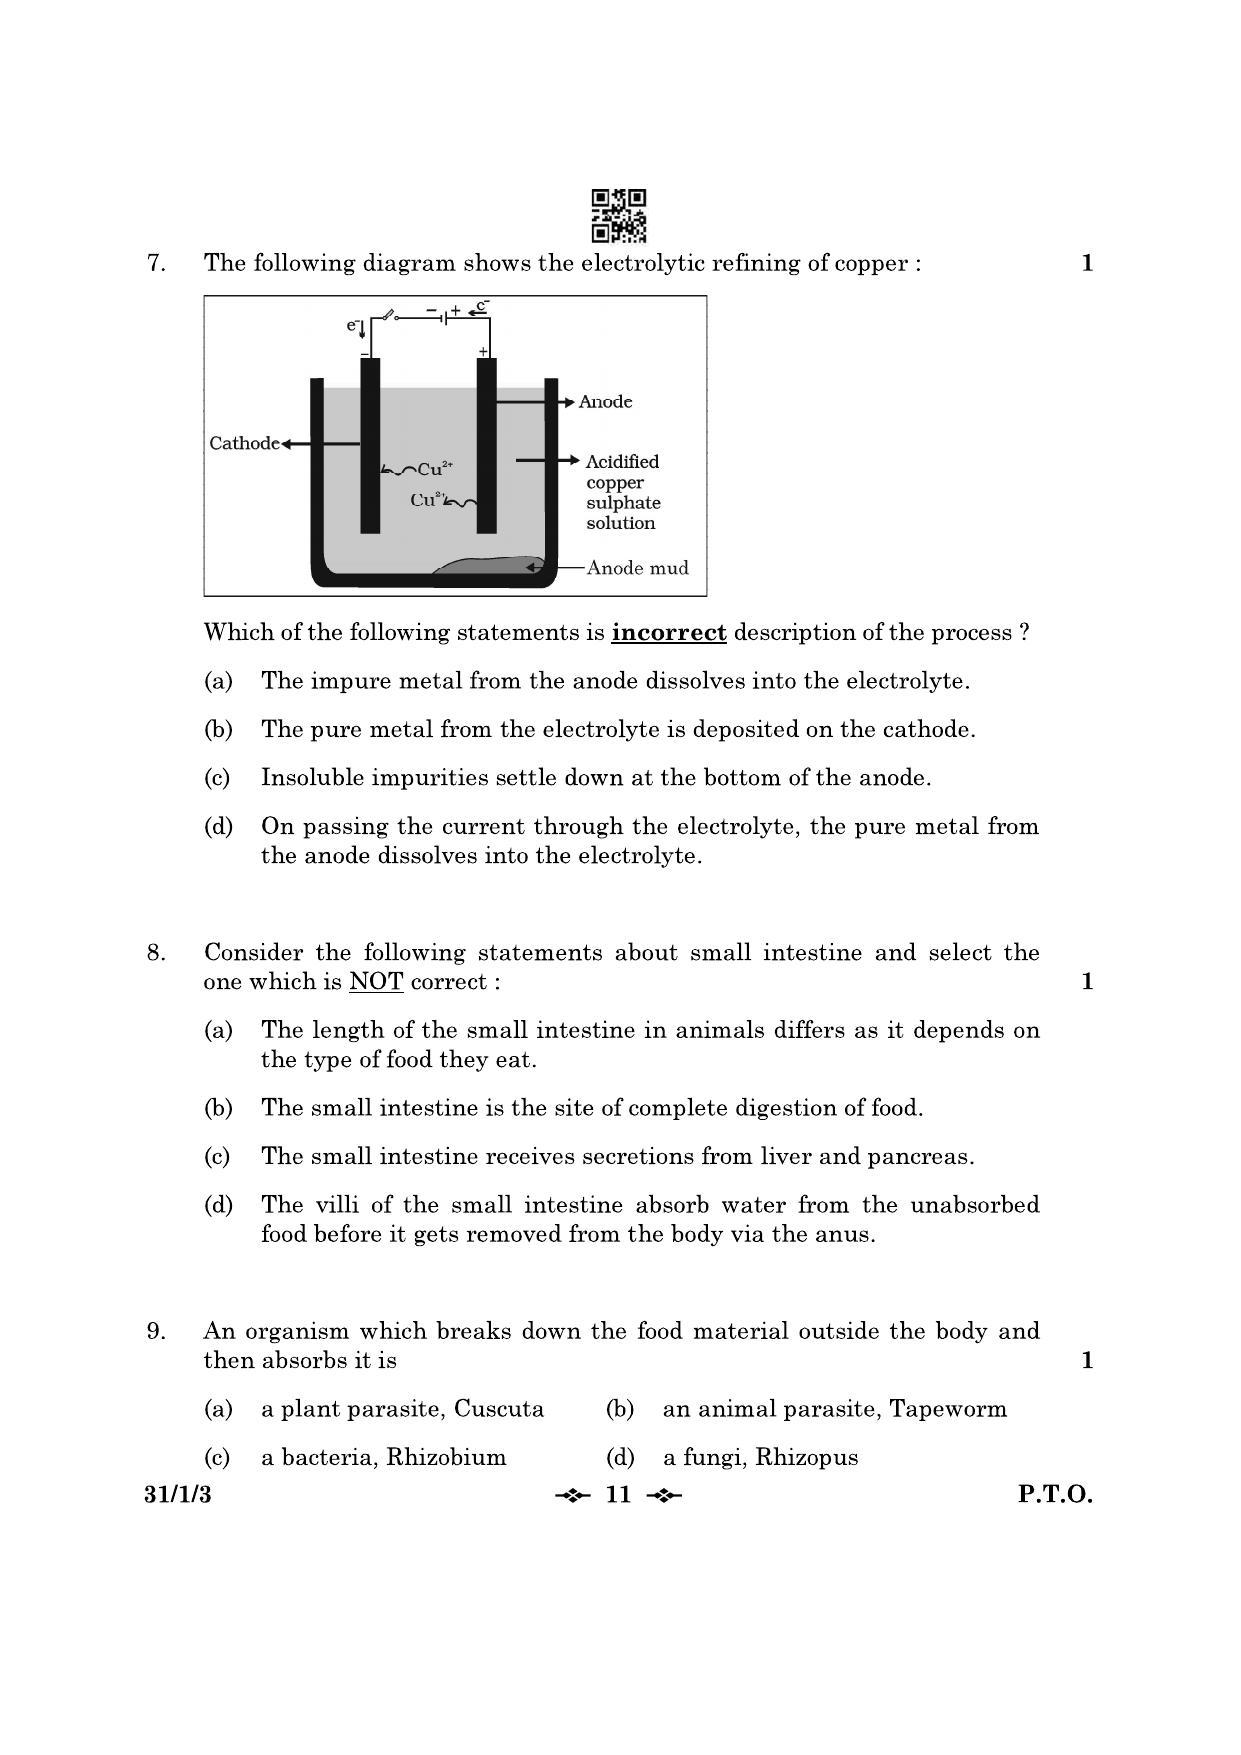 CBSE Class 10 31-1-3 Science 2023 Question Paper - Page 11